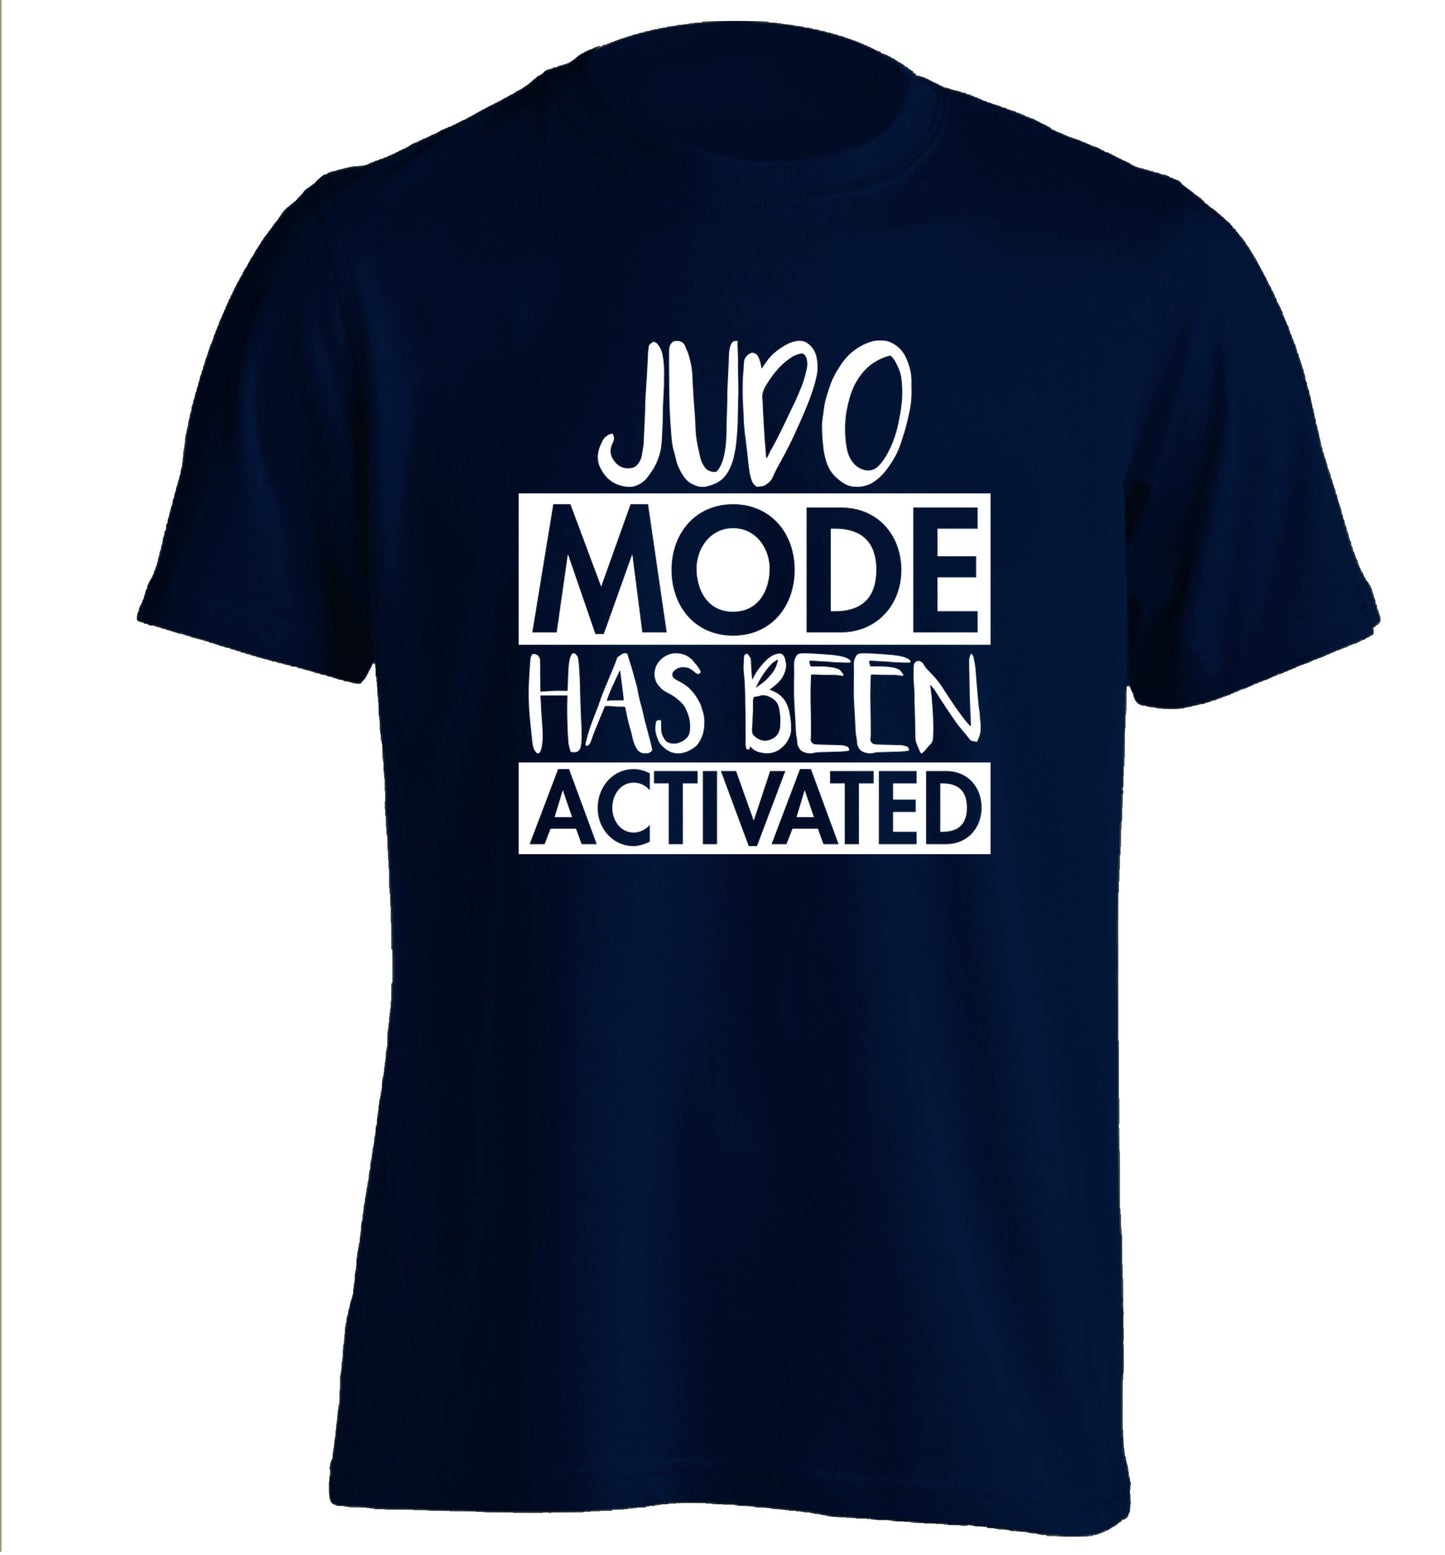 Judo mode activated adults unisex navy Tshirt 2XL